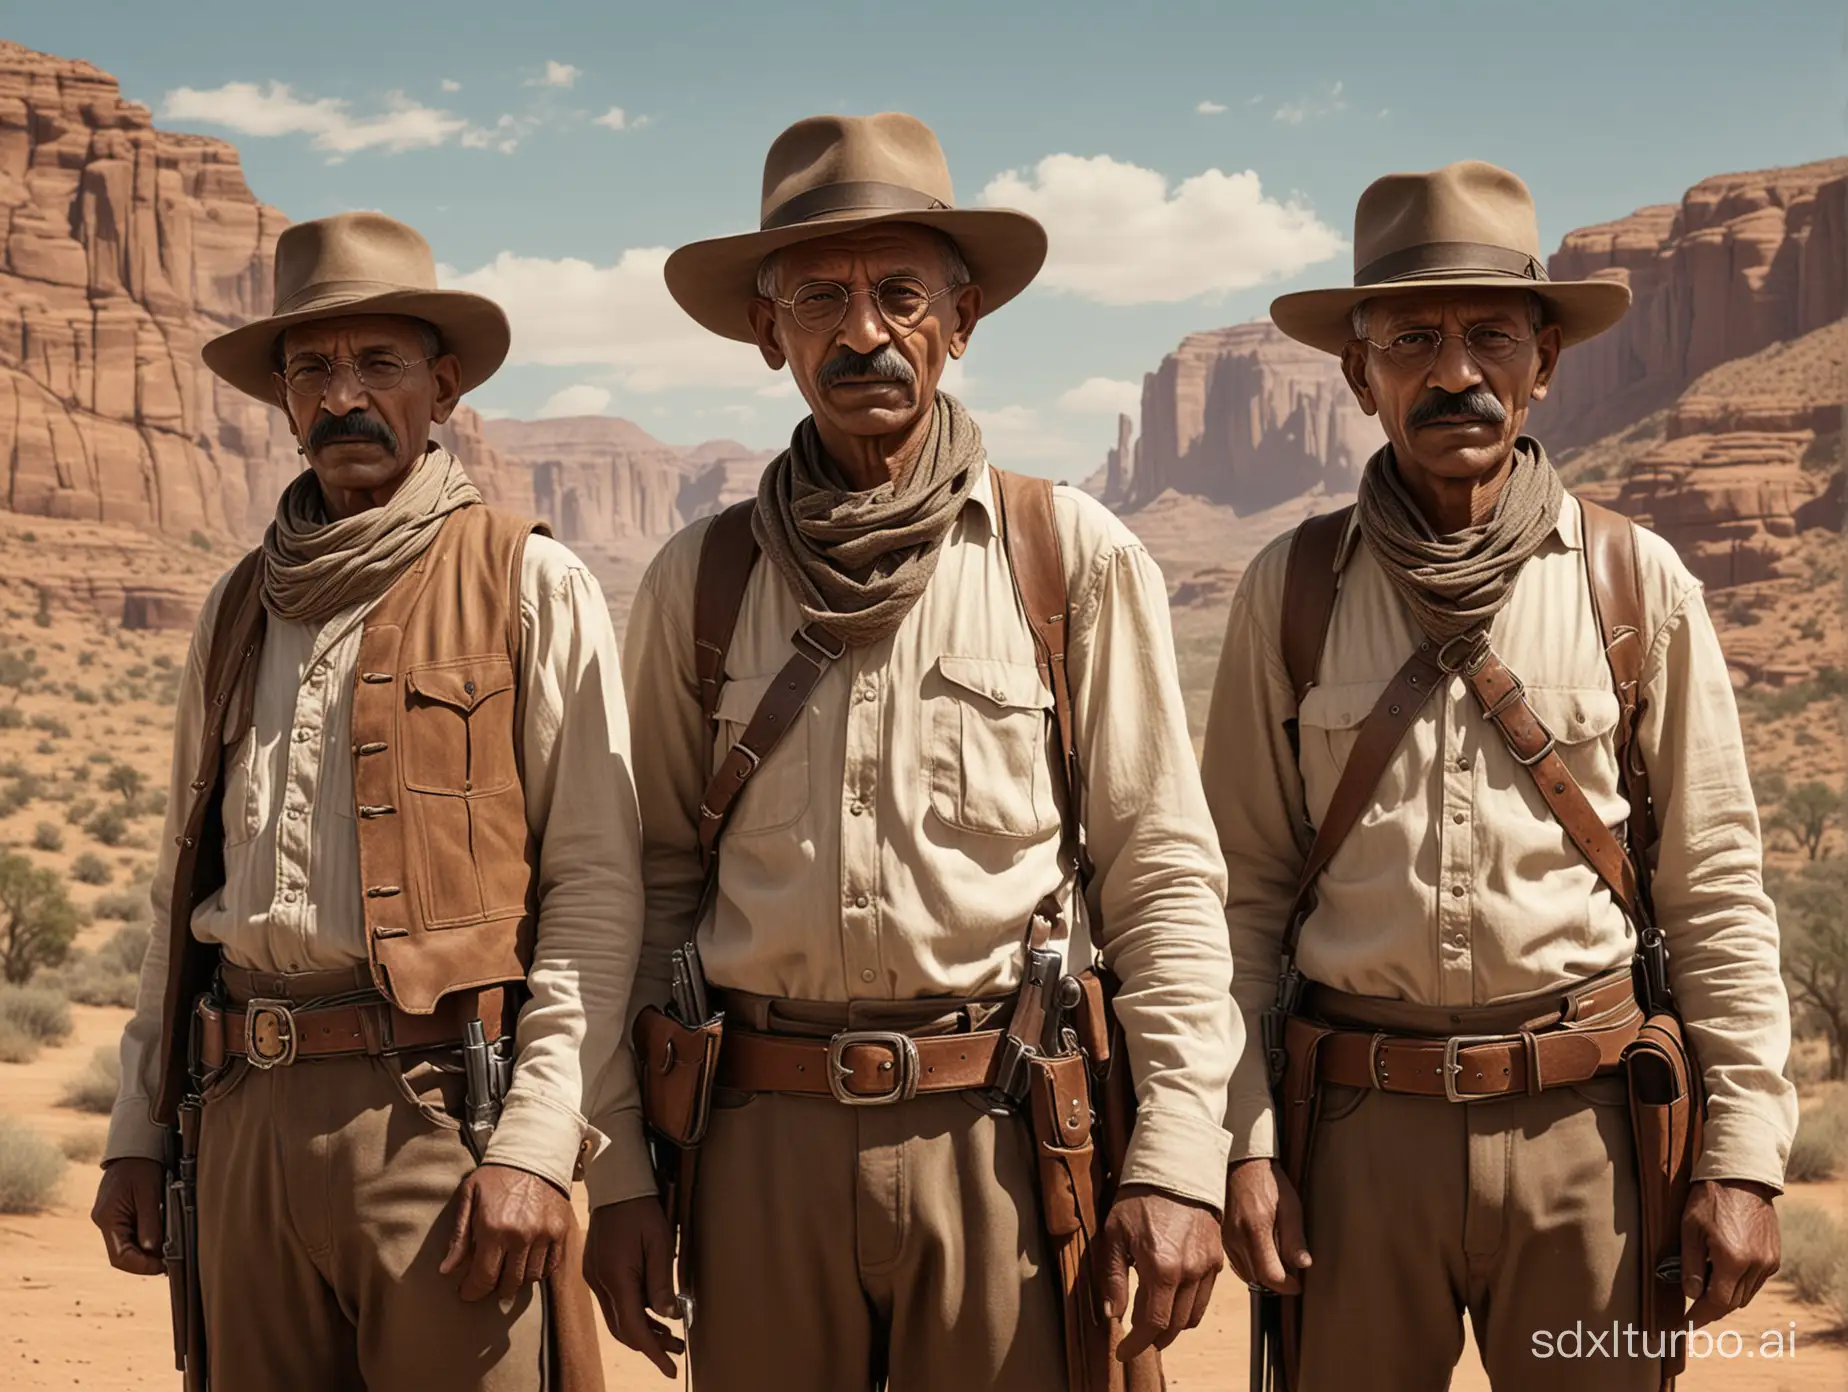 An extremely photo realistic cowboy western  image of Mahatma Ghandi dressed as a very slim  gun slingers ready to engage in a Hollywood style gunfight duel.